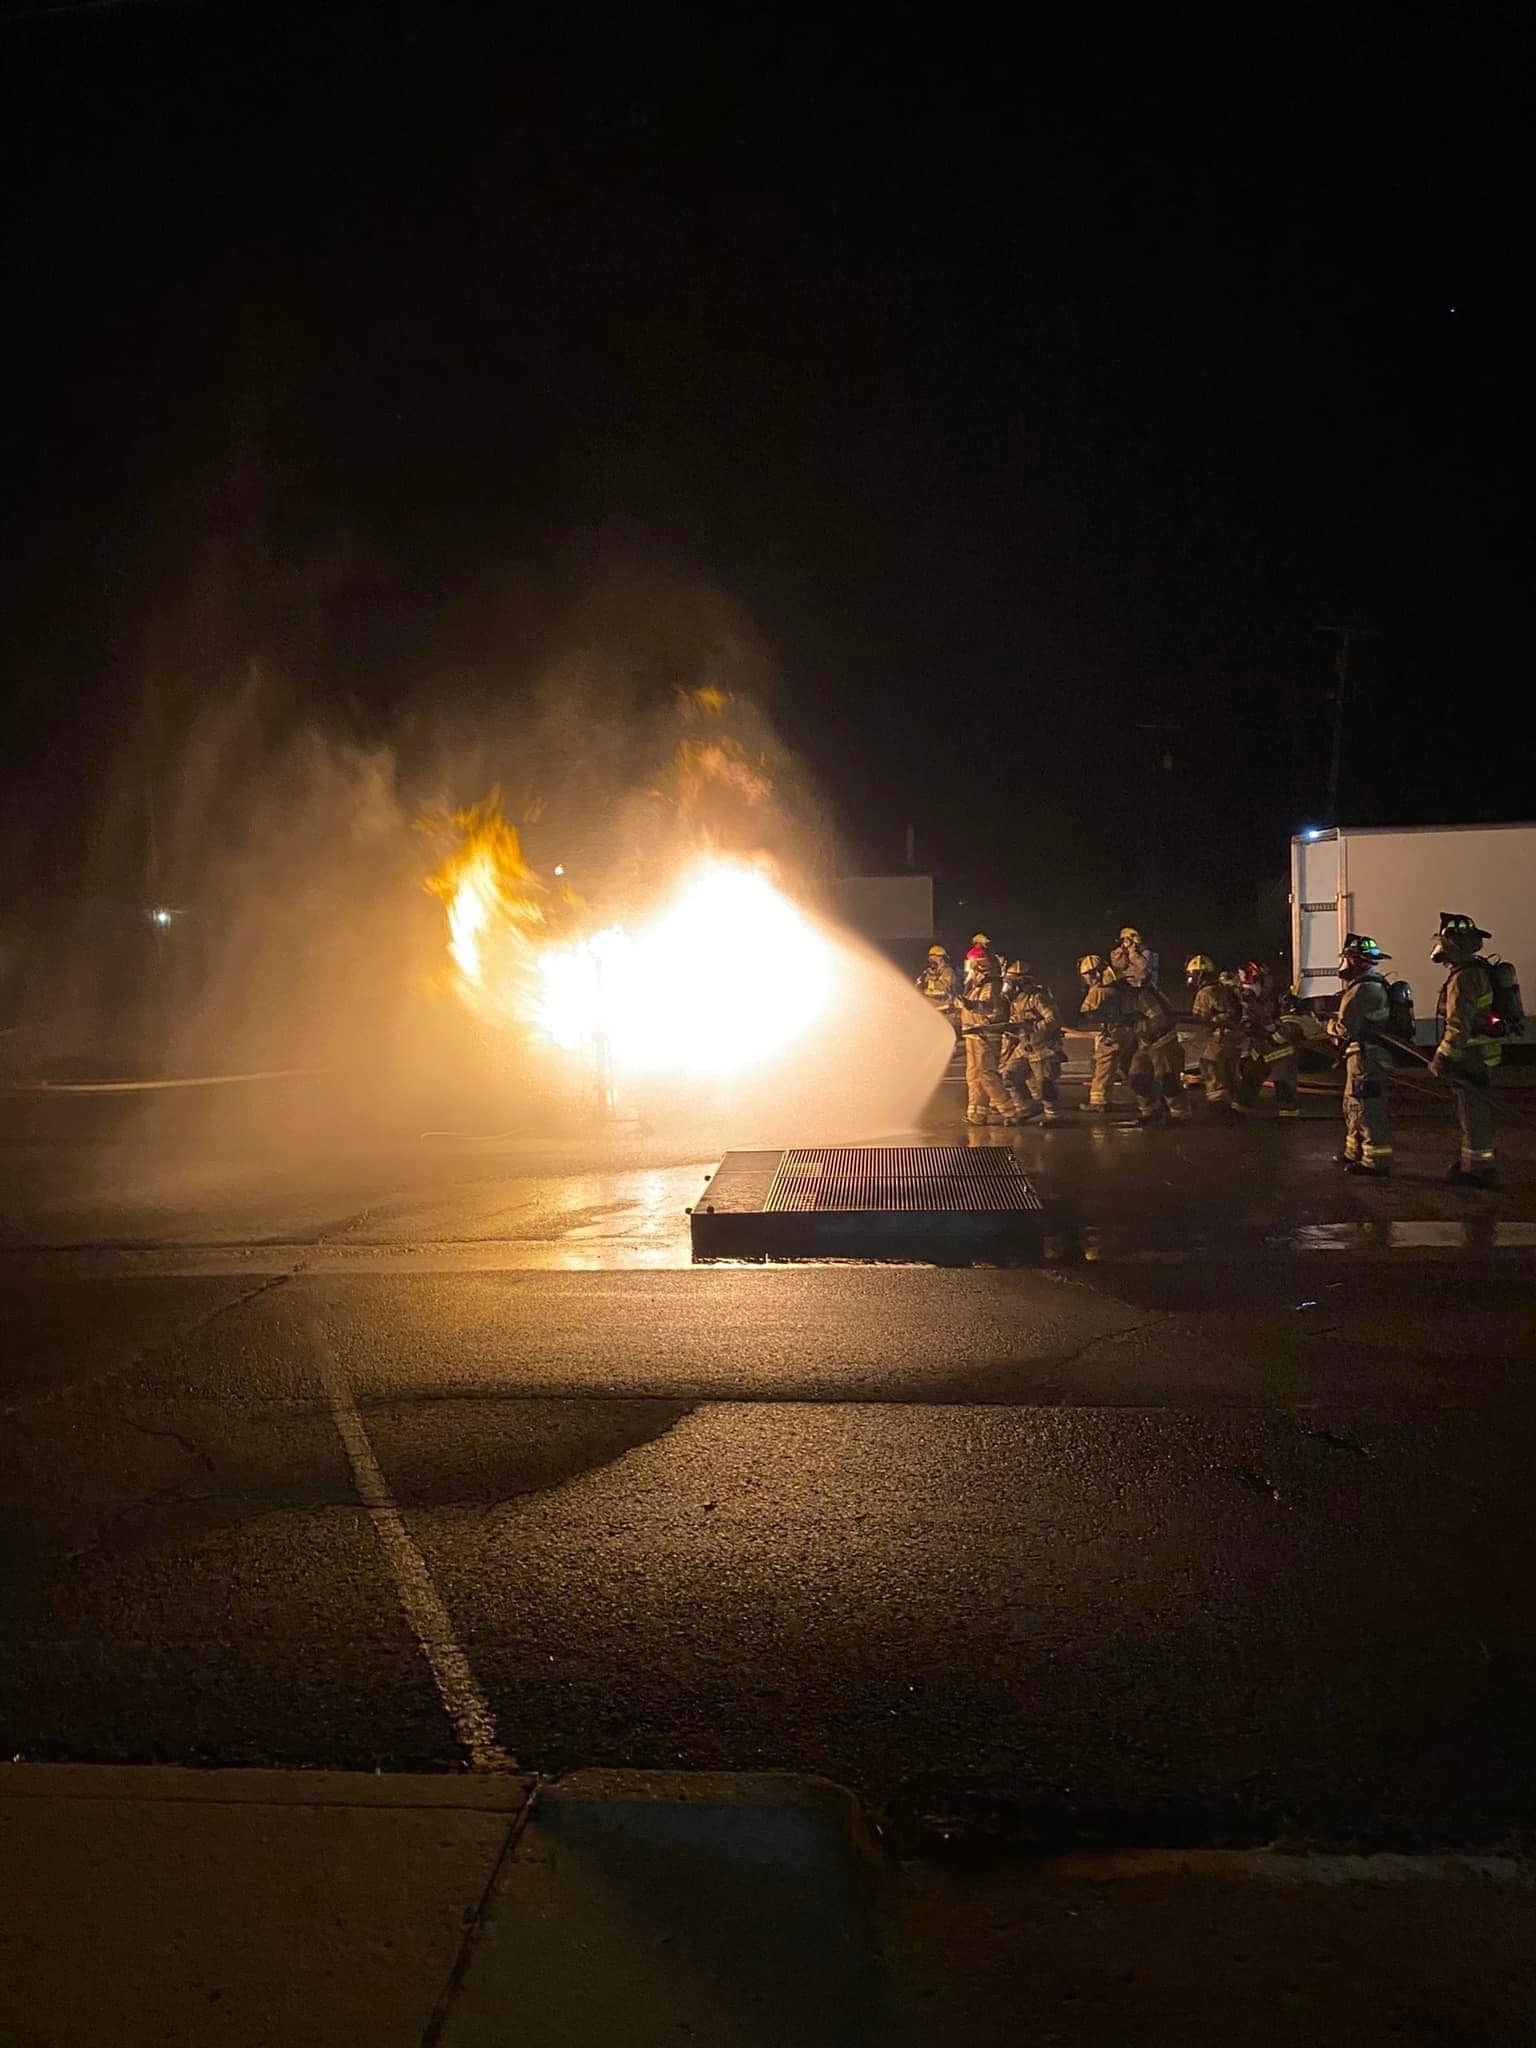 Fire fighters use a chemical spray to extinguish a flammable gas fire during a training session after dark. 